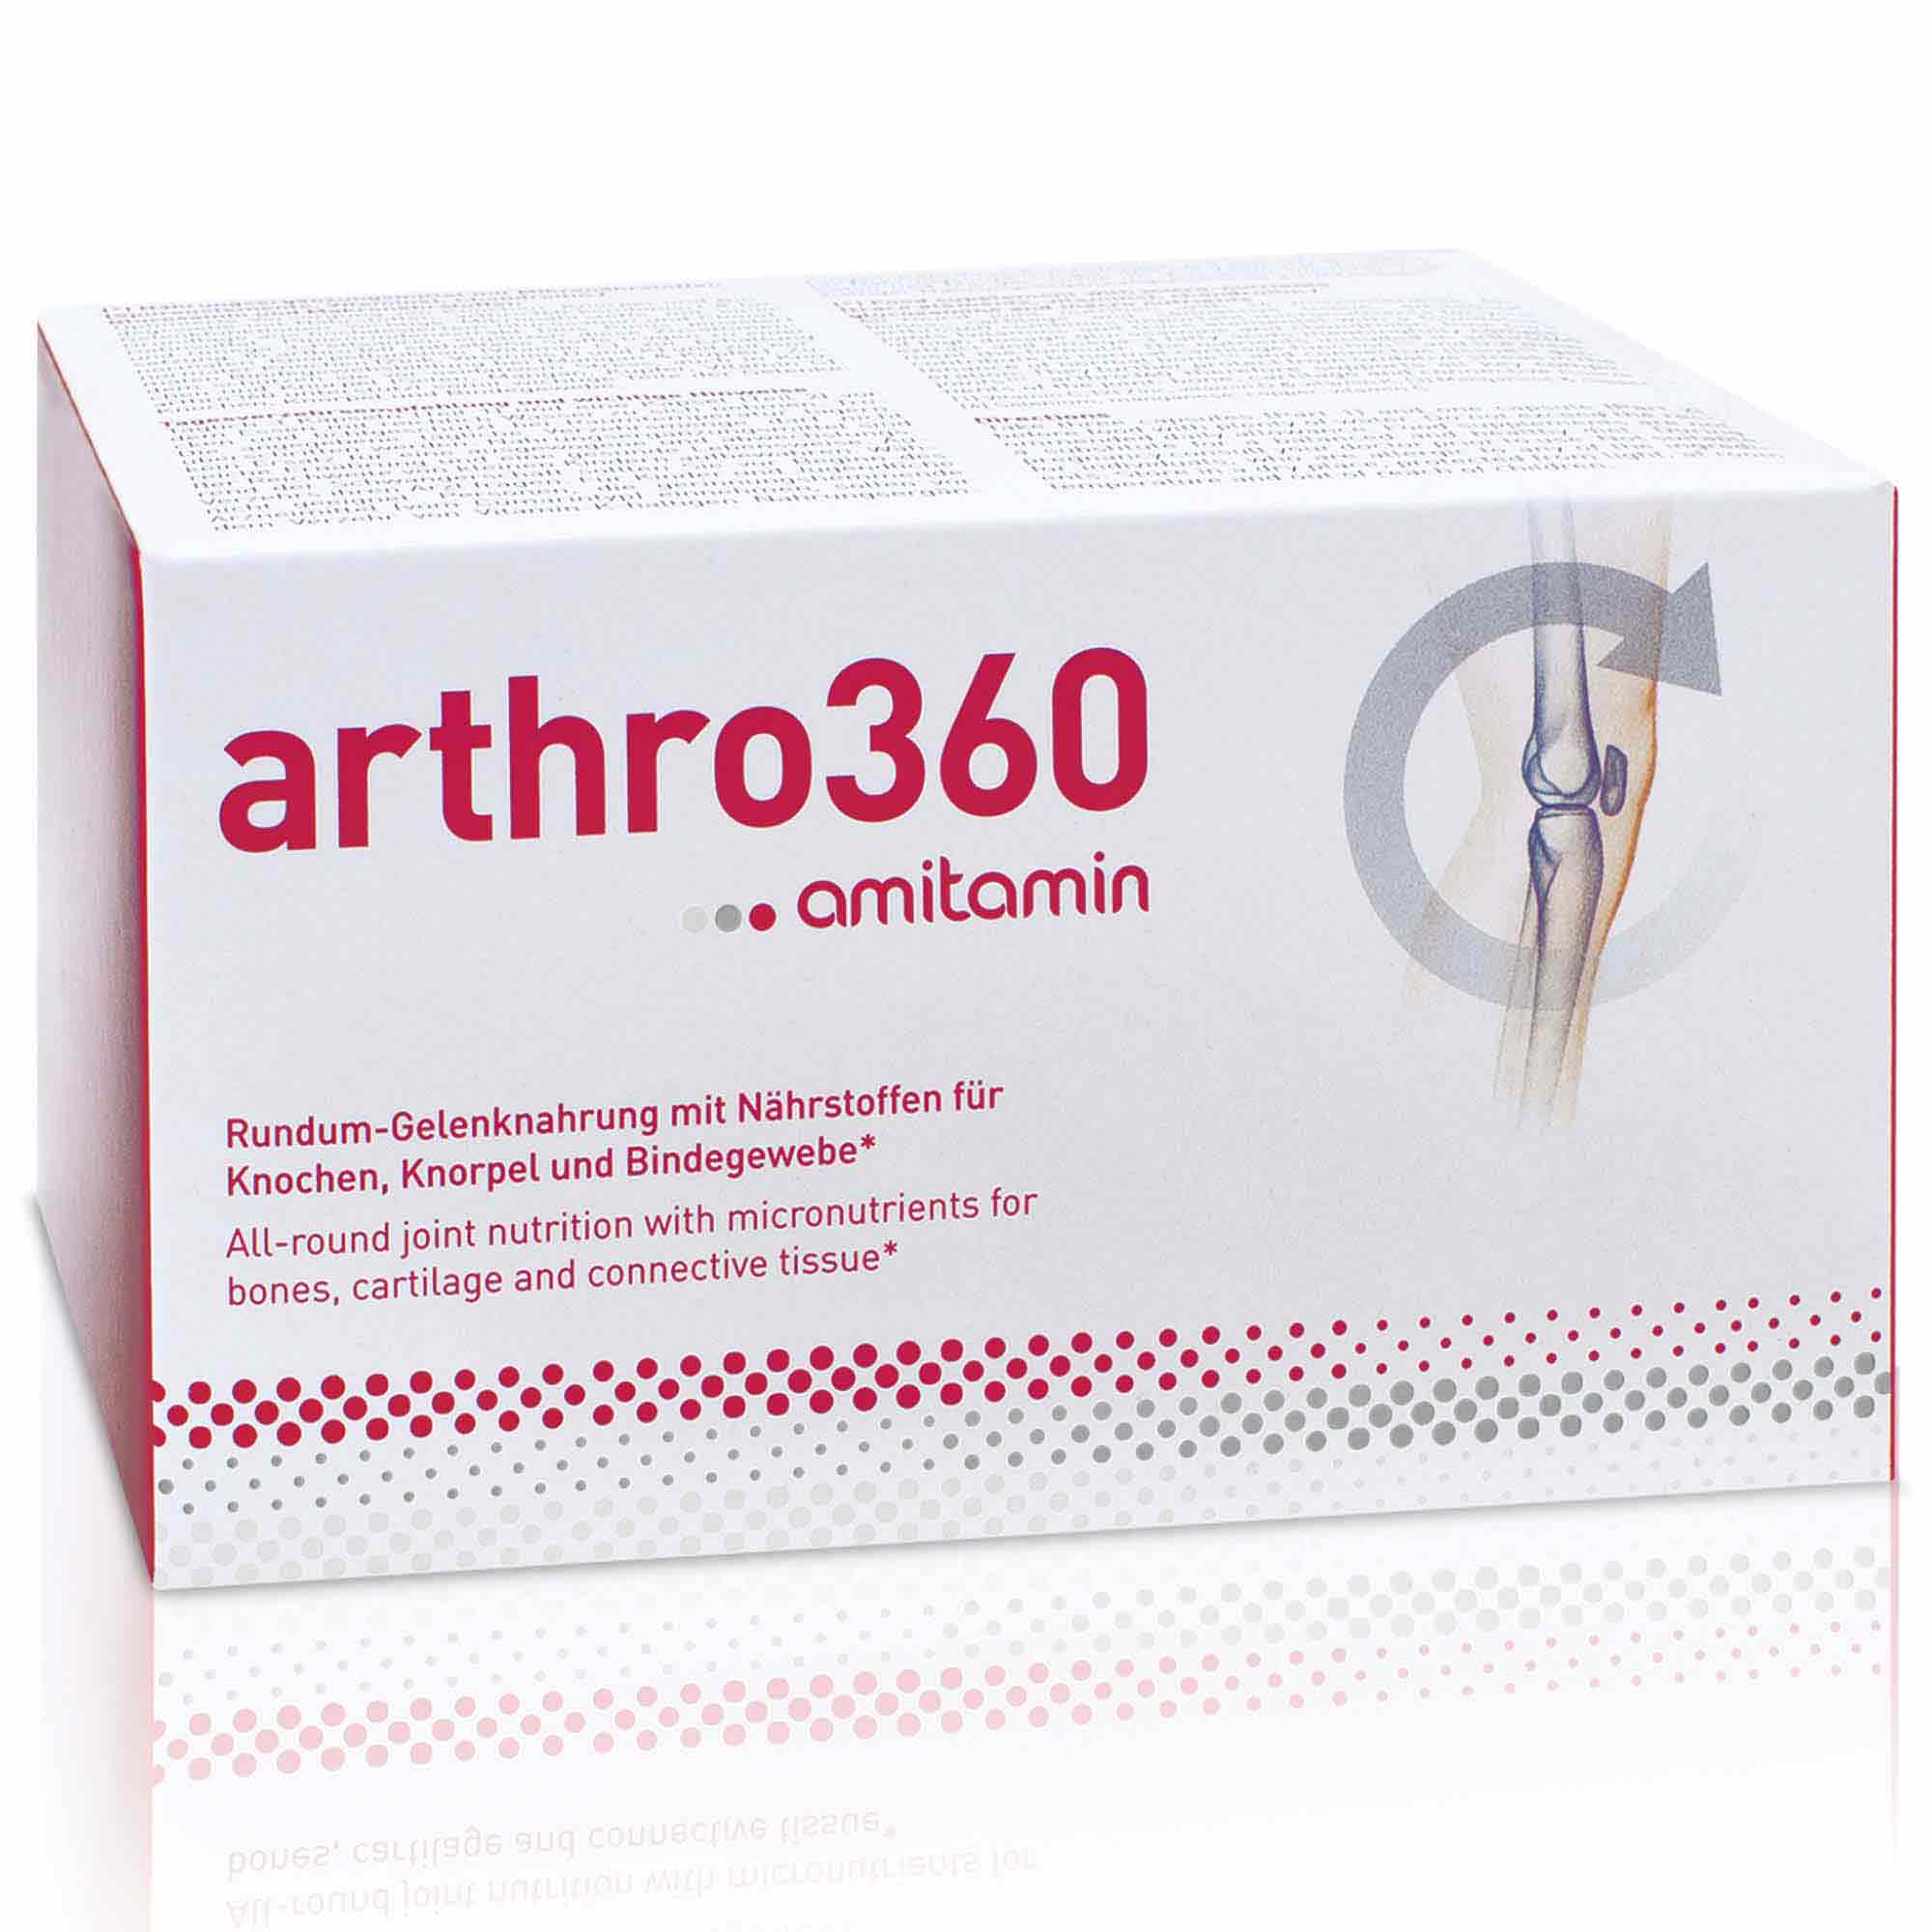 Optimal Joints Bundle - Fight Arthritis & Protect your Joints - 3x arthro360 + 3x collagen system (3 Months Supply)